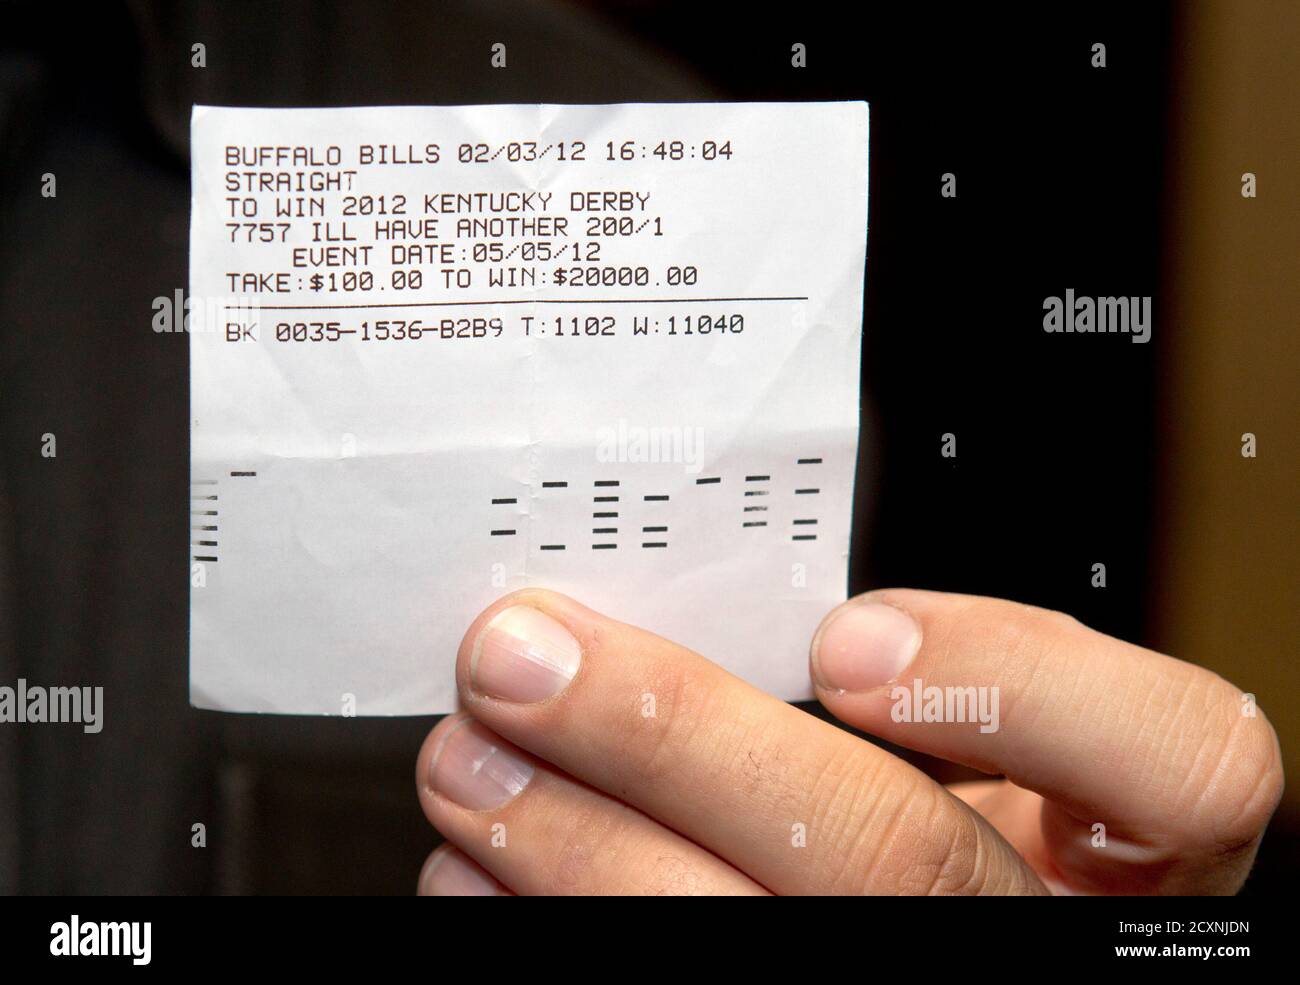 Doug O'Neill, trainer of Kentucky Derby winner 'I'll Have Another', displays his betting ticket before cashing the 200-to-1 future bet on the horse at the Primm Valley Casino in Primm, Nevada June 25, 2012. O'Neill won $20,000 for his $100 bet, which he made in February, that the horse would win the Kentucky Derby. REUTERS/Las Vegas Sun/Steve Marcus (UNITED STATES - Tags: SPORT HORSE RACING) Stock Photo